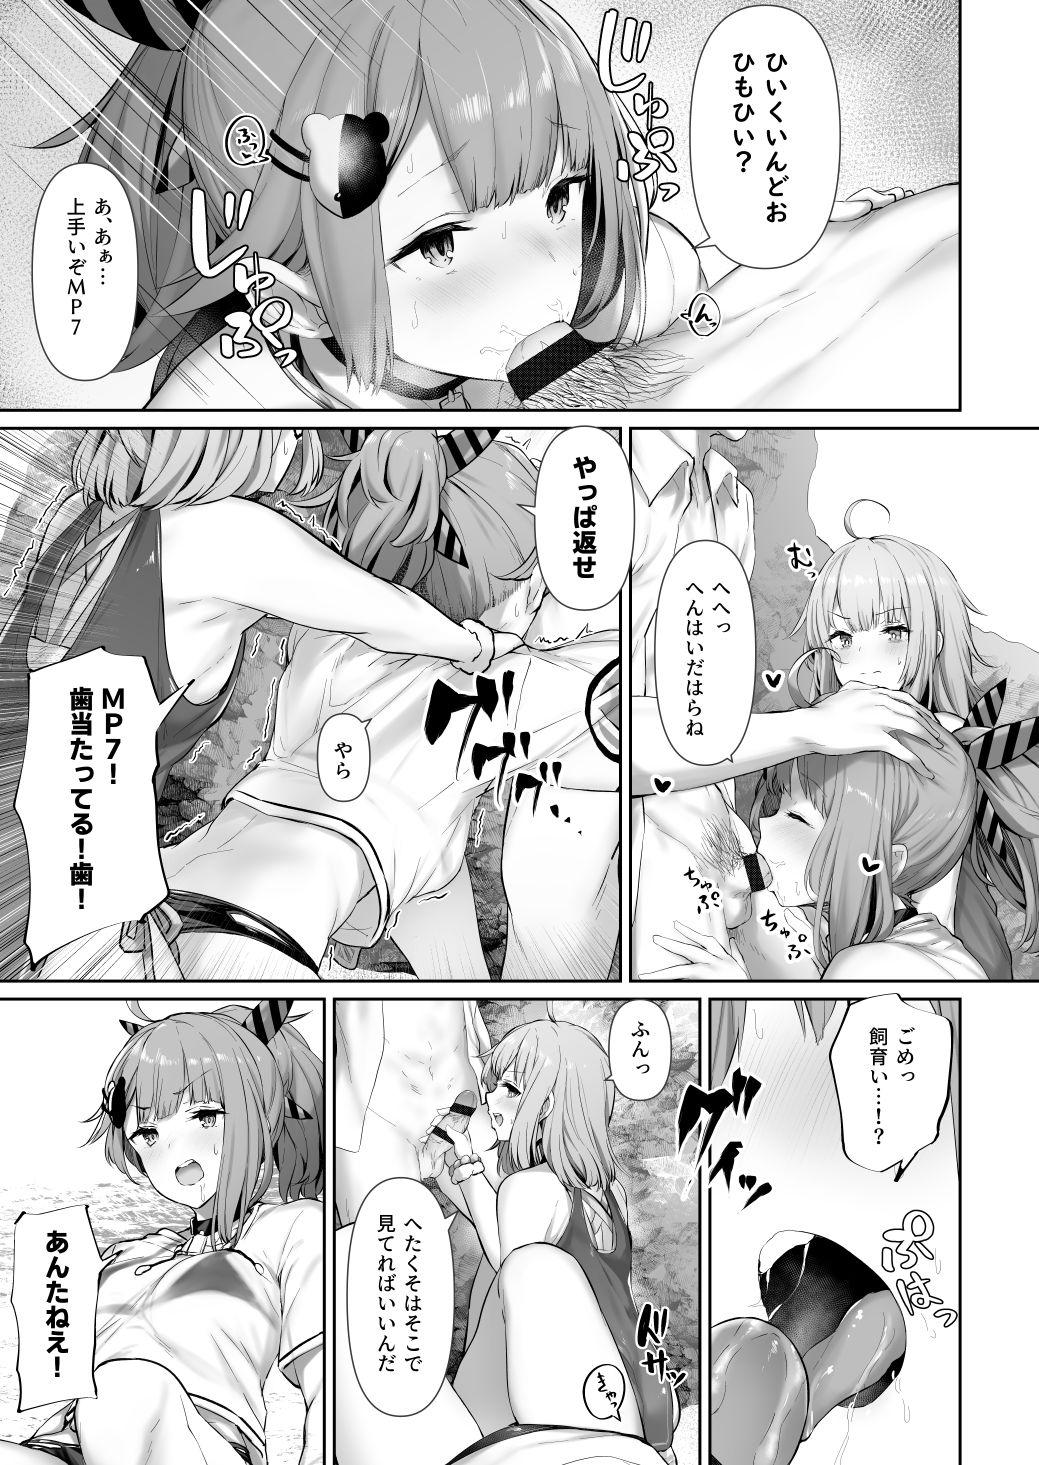 Blowjob Contest MP7 and AA-12 - Girls frontline Chick - Page 3